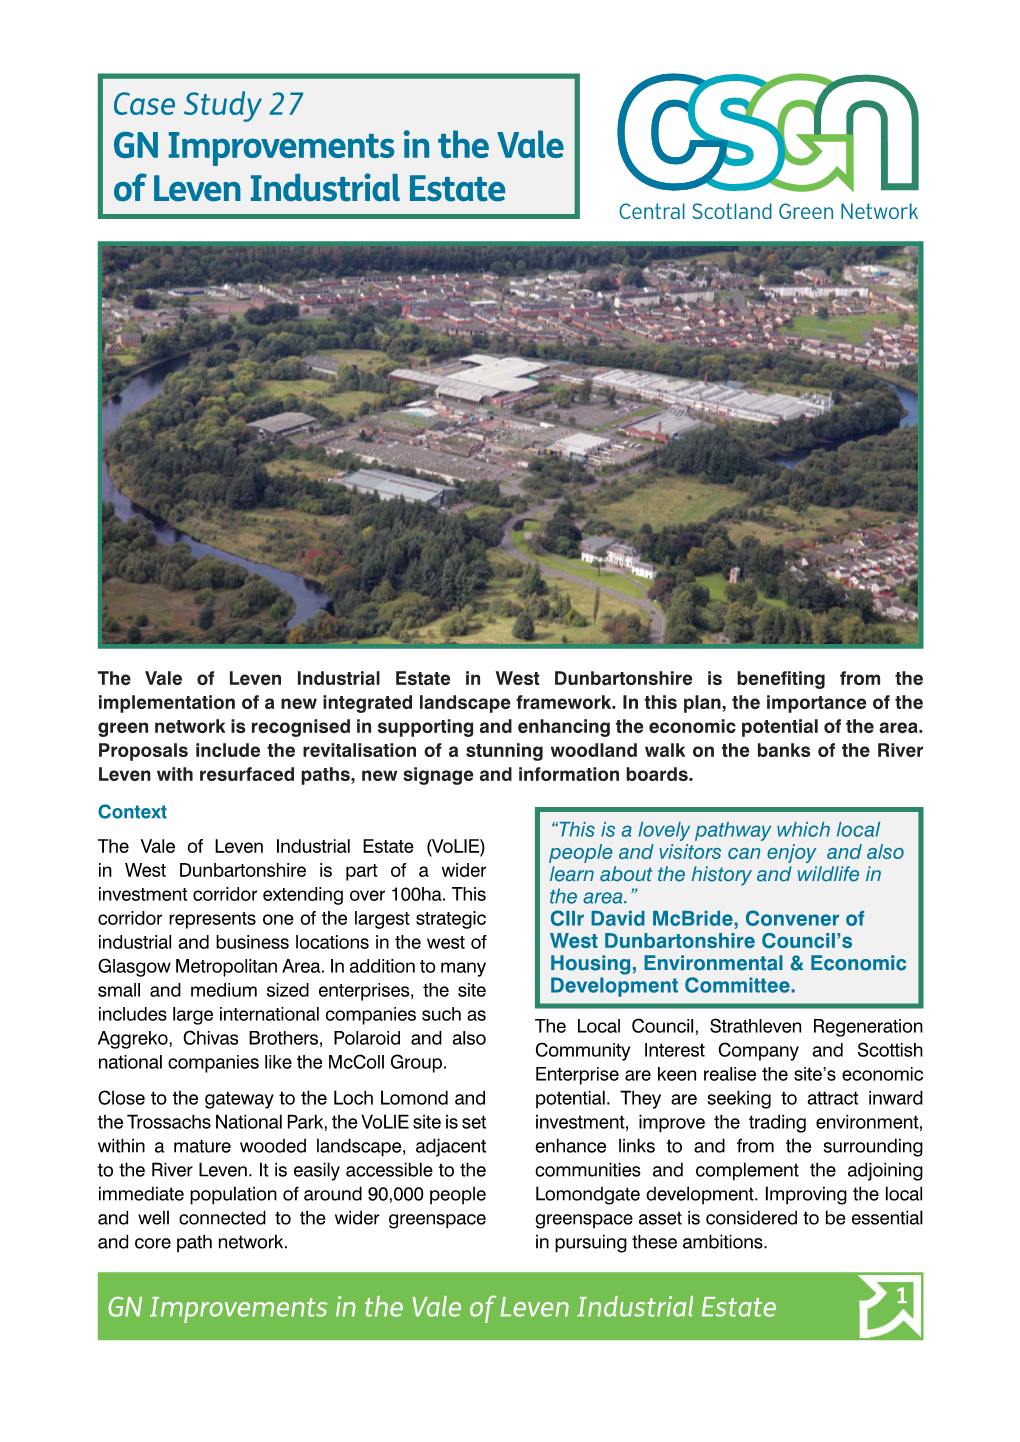 CSGN Vale of Leven Case Study